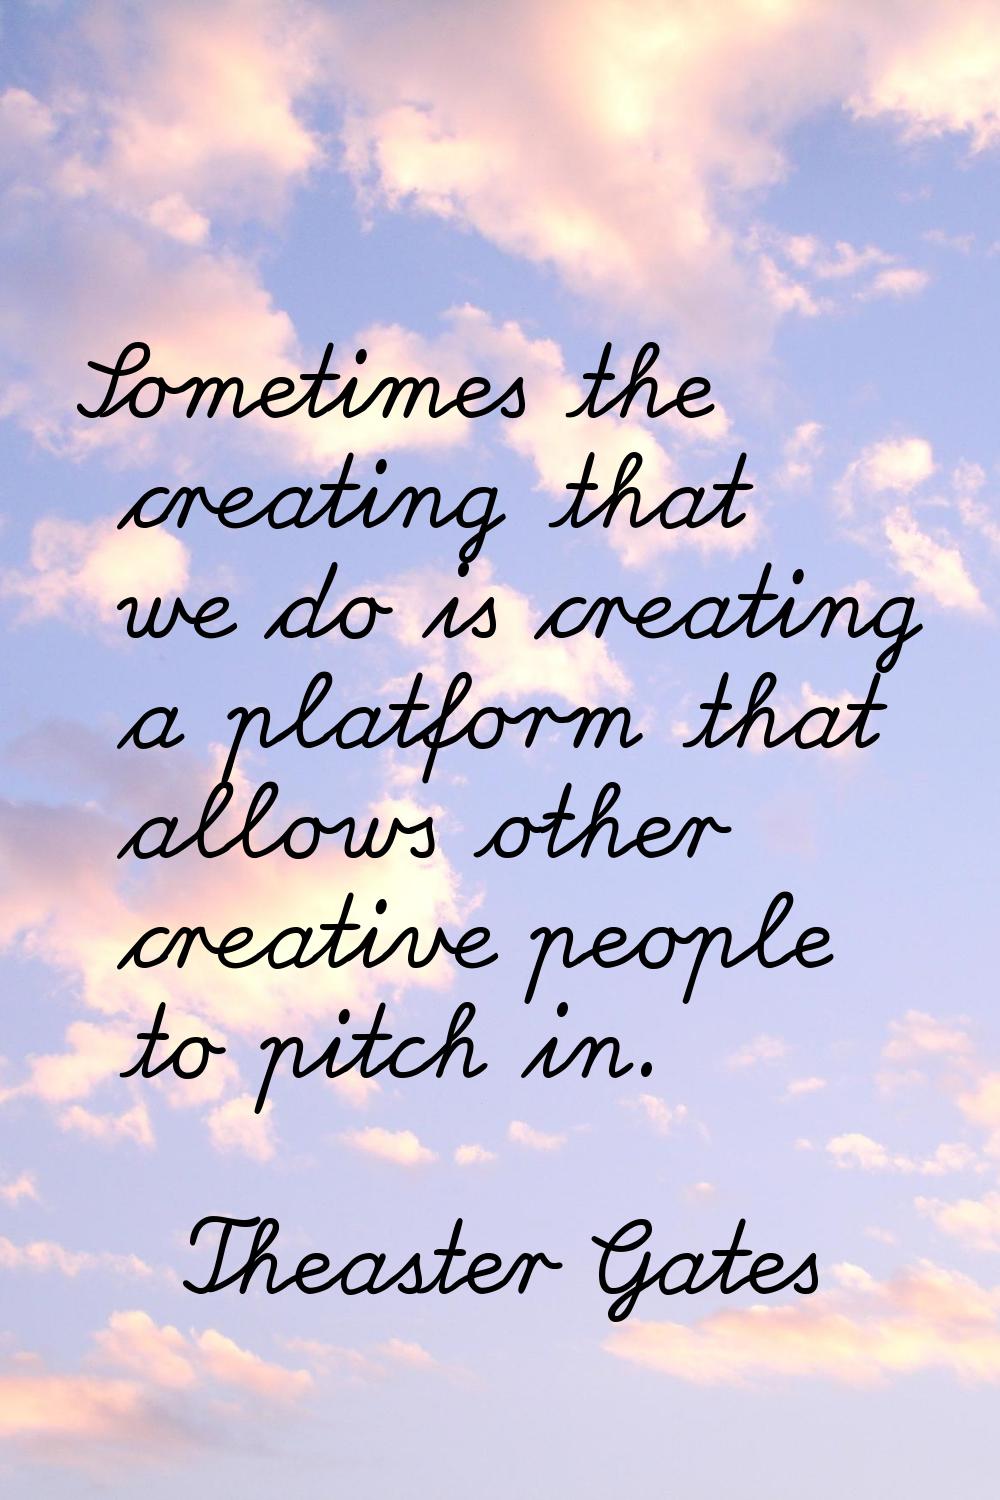 Sometimes the creating that we do is creating a platform that allows other creative people to pitch